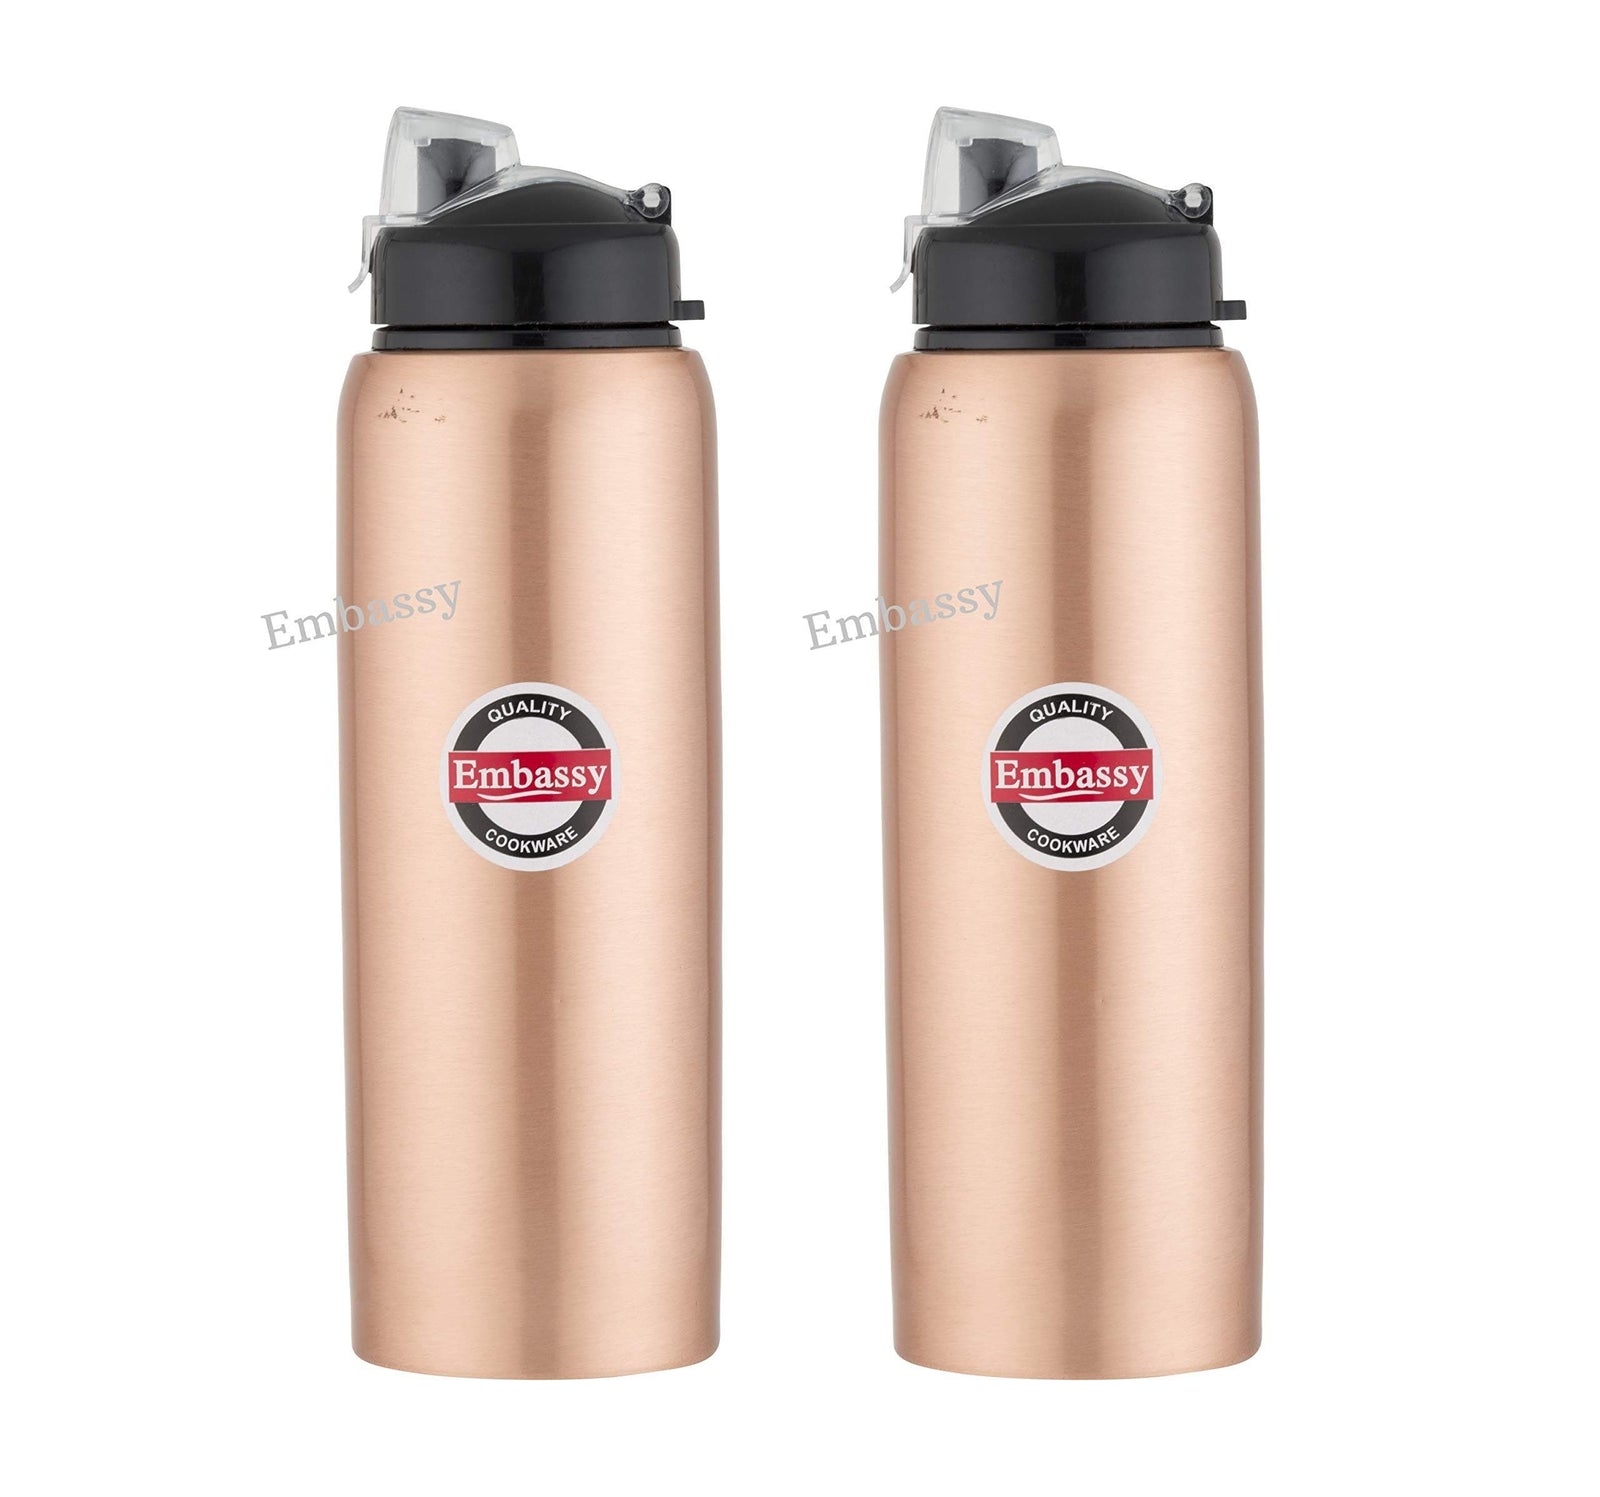 Embassy Premium Copper Water Bottle, Sipper, 600 ml, Pack of 2 - Leak-Proof, Jointless and Pure Copper - KITCHEN MART